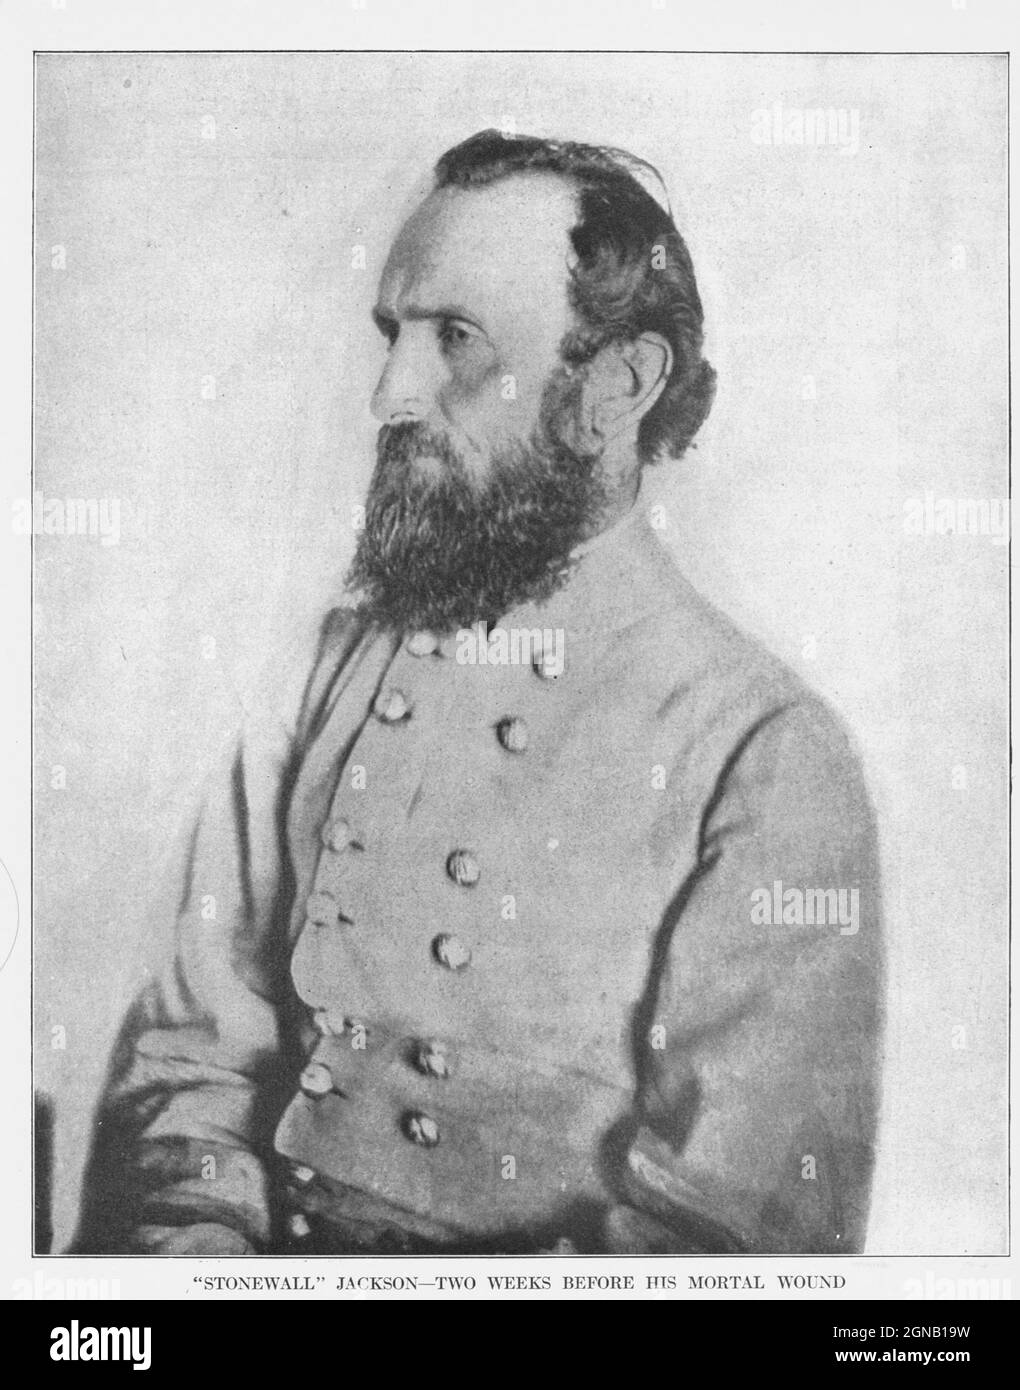 Thomas Jonathan 'Stonewall' Jackson (January 21, 1824 – May 10, 1863) served as a Confederate general (1861–1863) during the American Civil War, and became one of the best-known Confederate commanders after General Robert E. Lee.[2] Jackson played a prominent role in nearly all military engagements in the Eastern Theater of the war until his death, and had a key part in winning many significant battles. from the book ' The Civil war through the camera ' hundreds of vivid photographs actually taken in Civil war times, sixteen reproductions in color of famous war paintings. The new text history Stock Photo